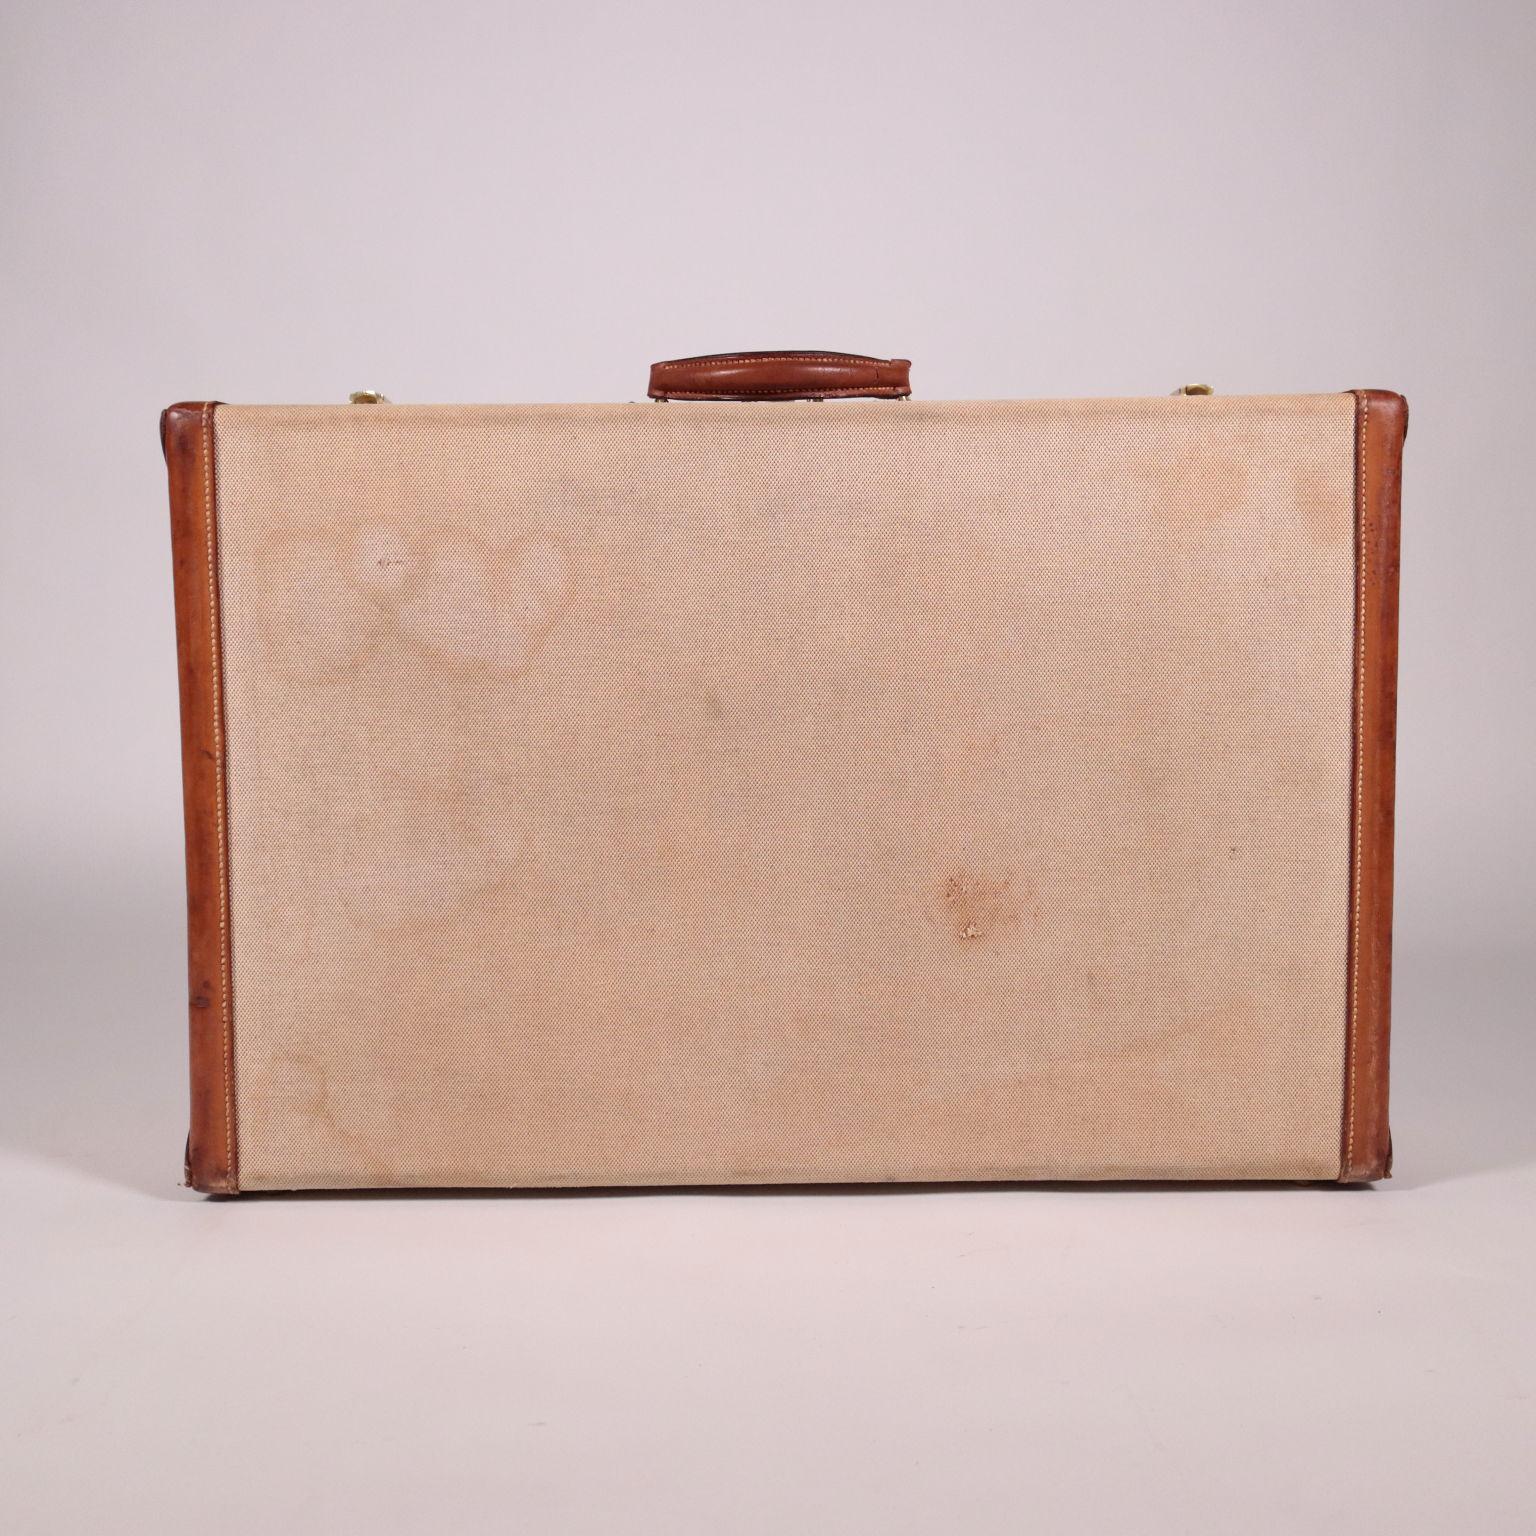 French Hèrmes Suitcase Fabric Leather, France, 1940s-1950s